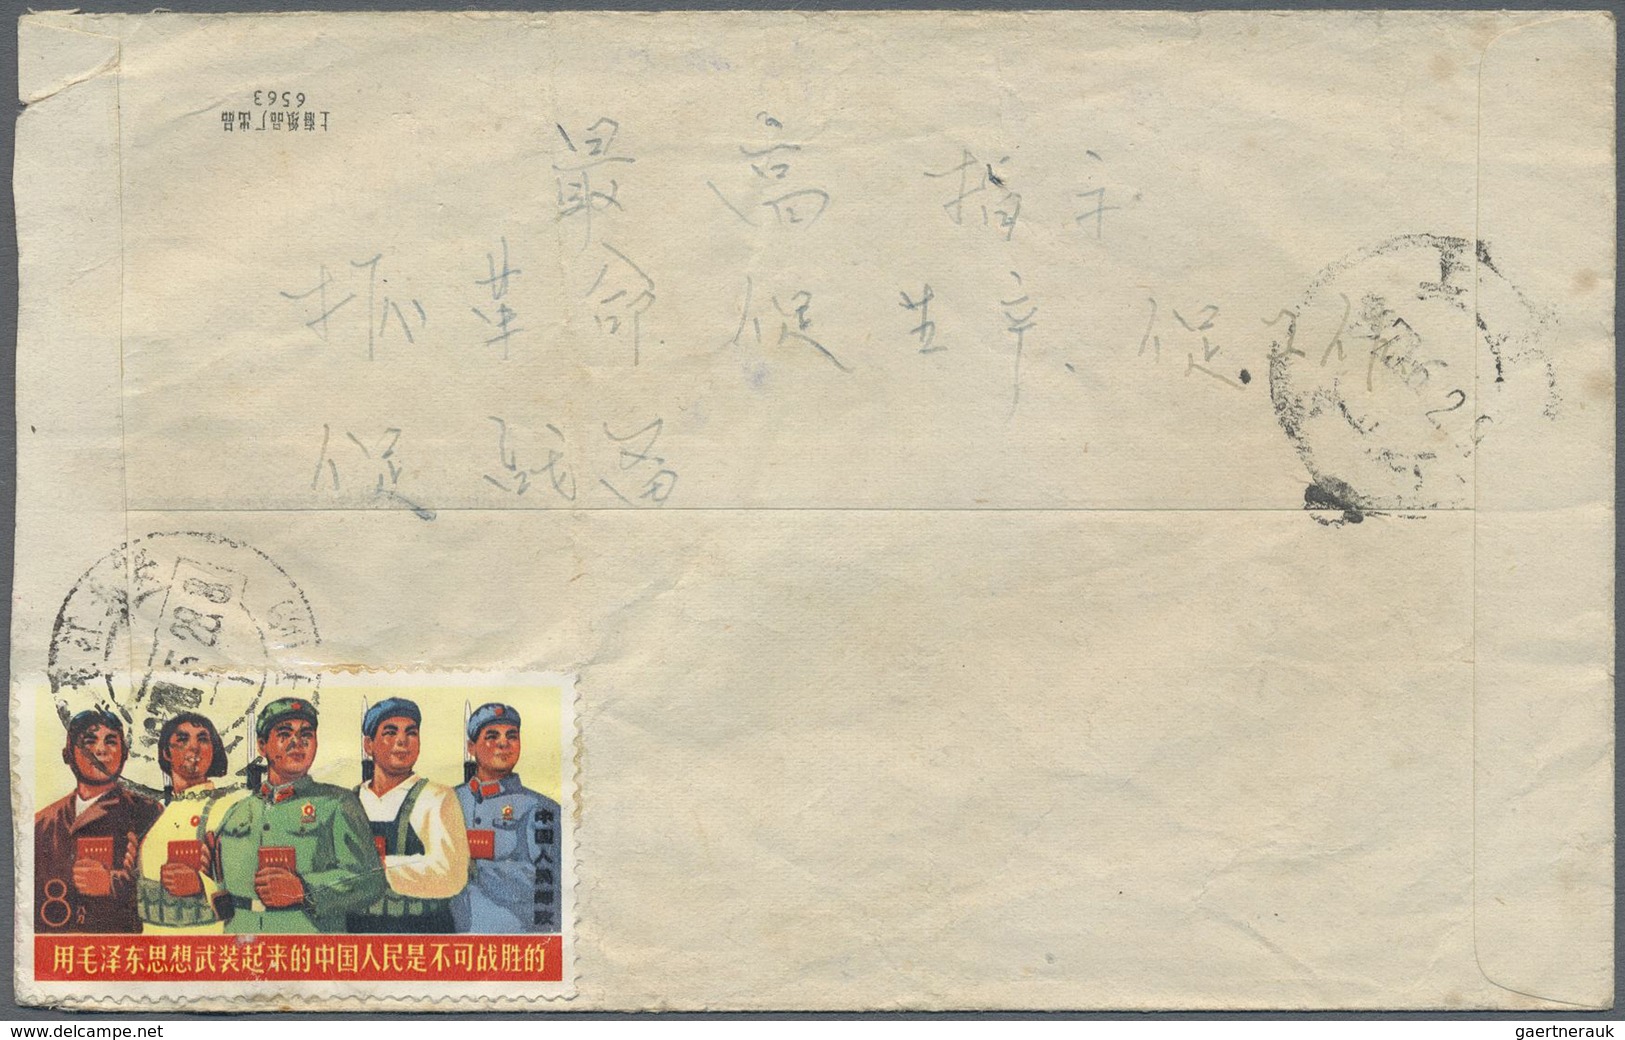 Br China - Volksrepublik: 1967/70, single franks on inland covers (9), also N7 pair and theses (I) 8 F.